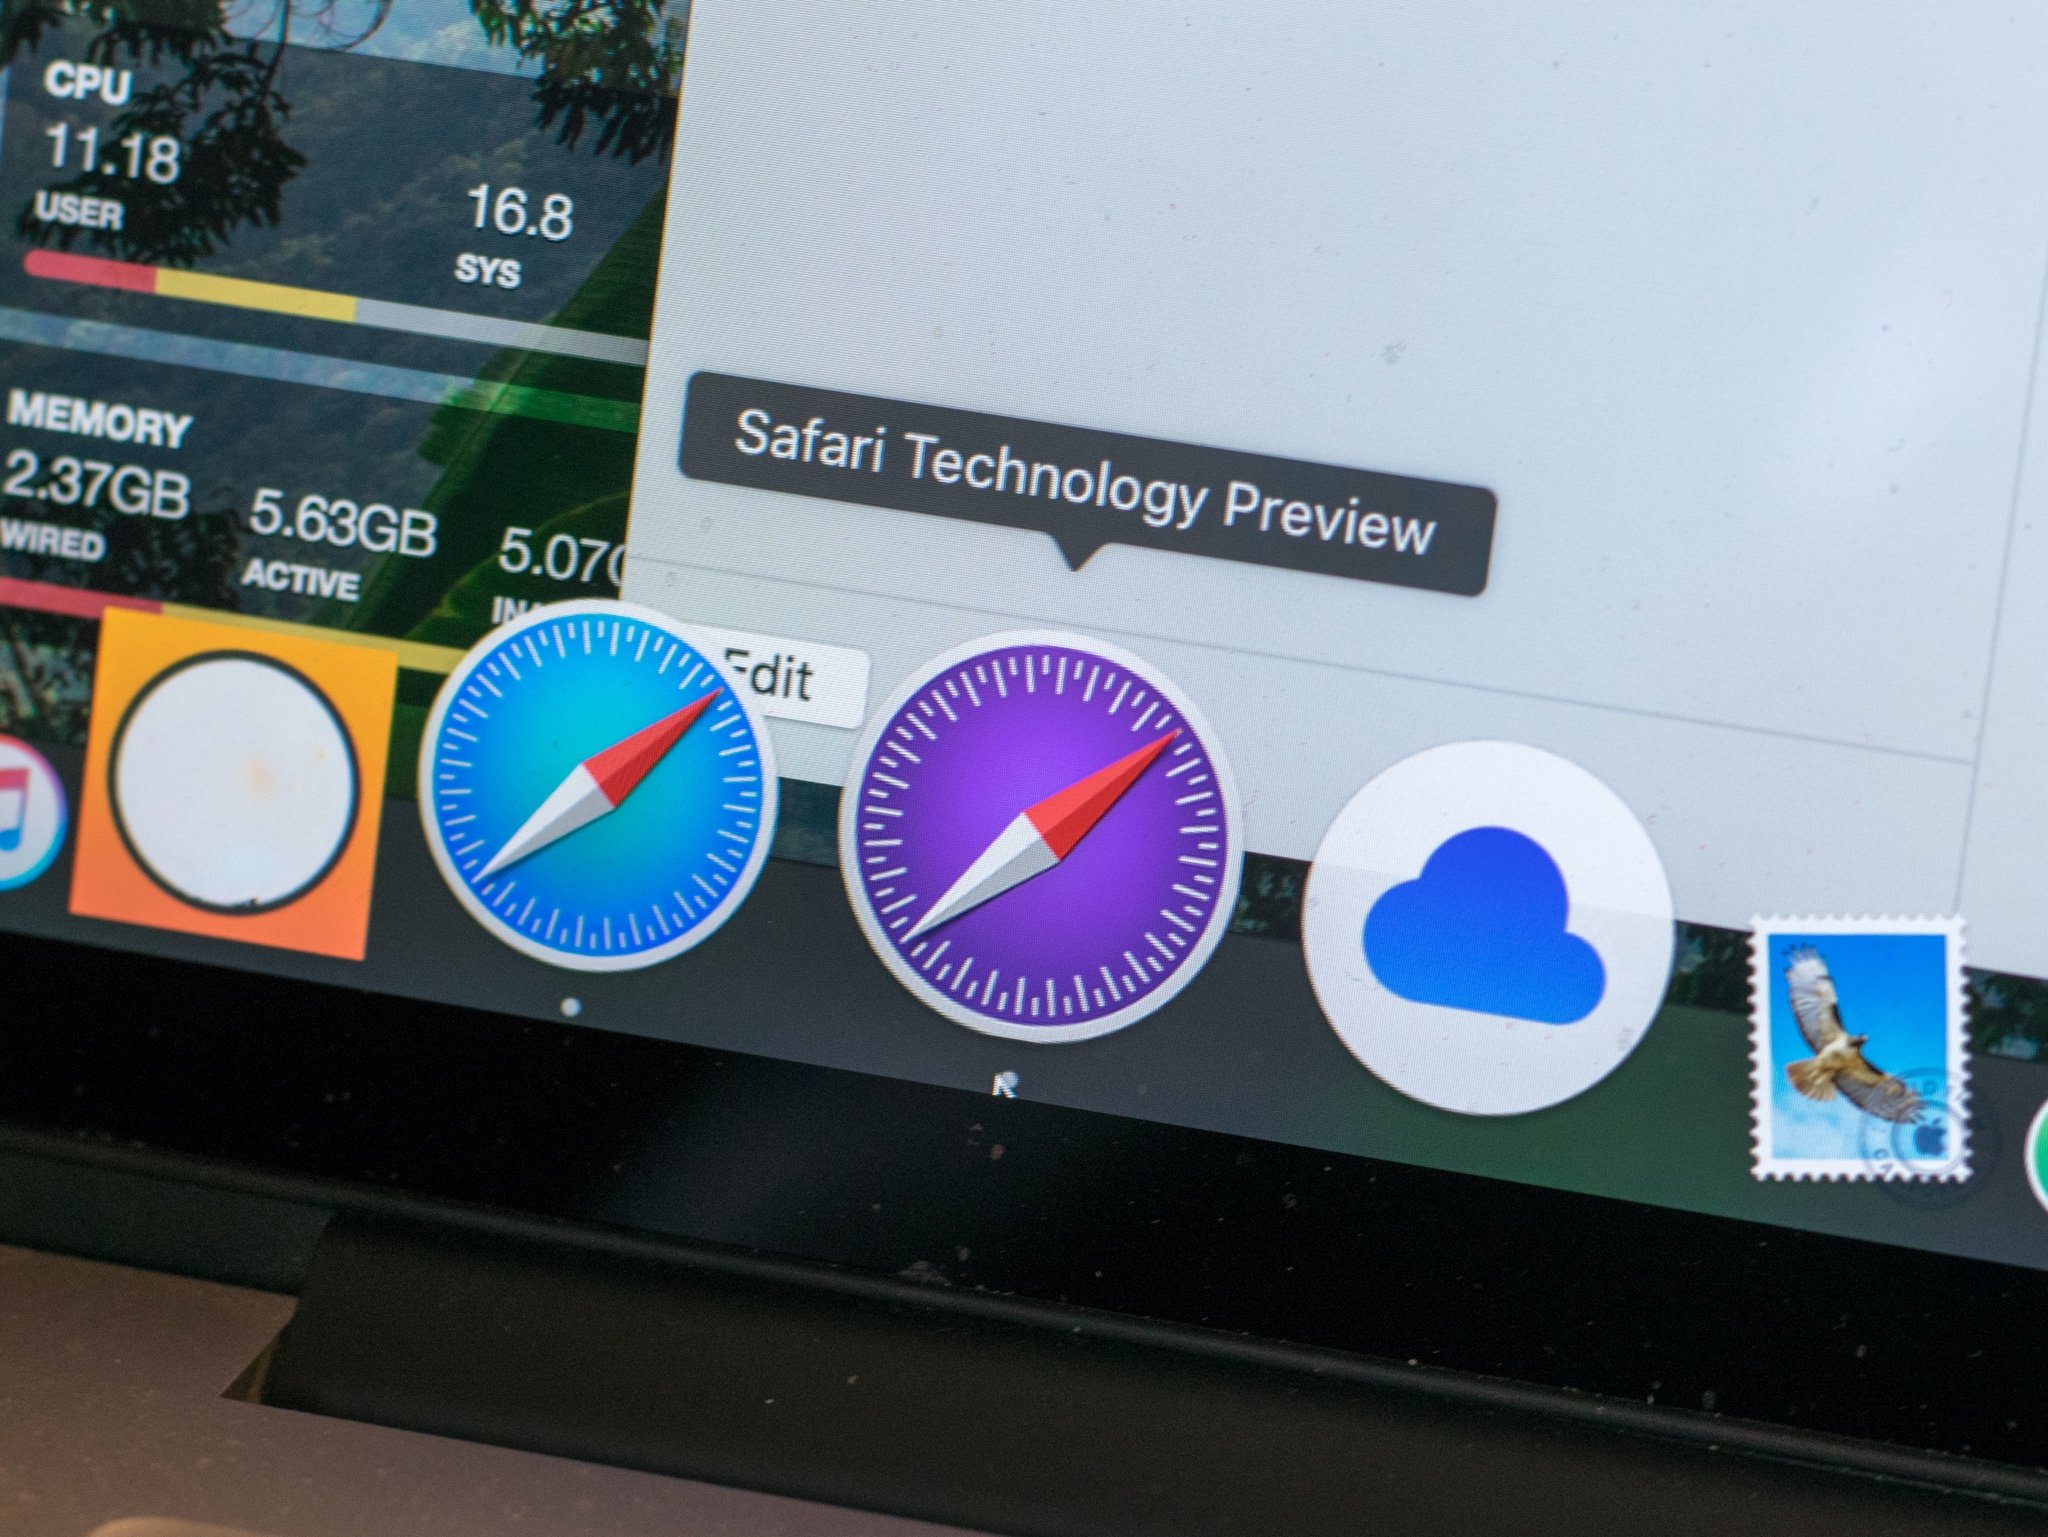 Apple launches the Safari Technology Preview to test new web technologies